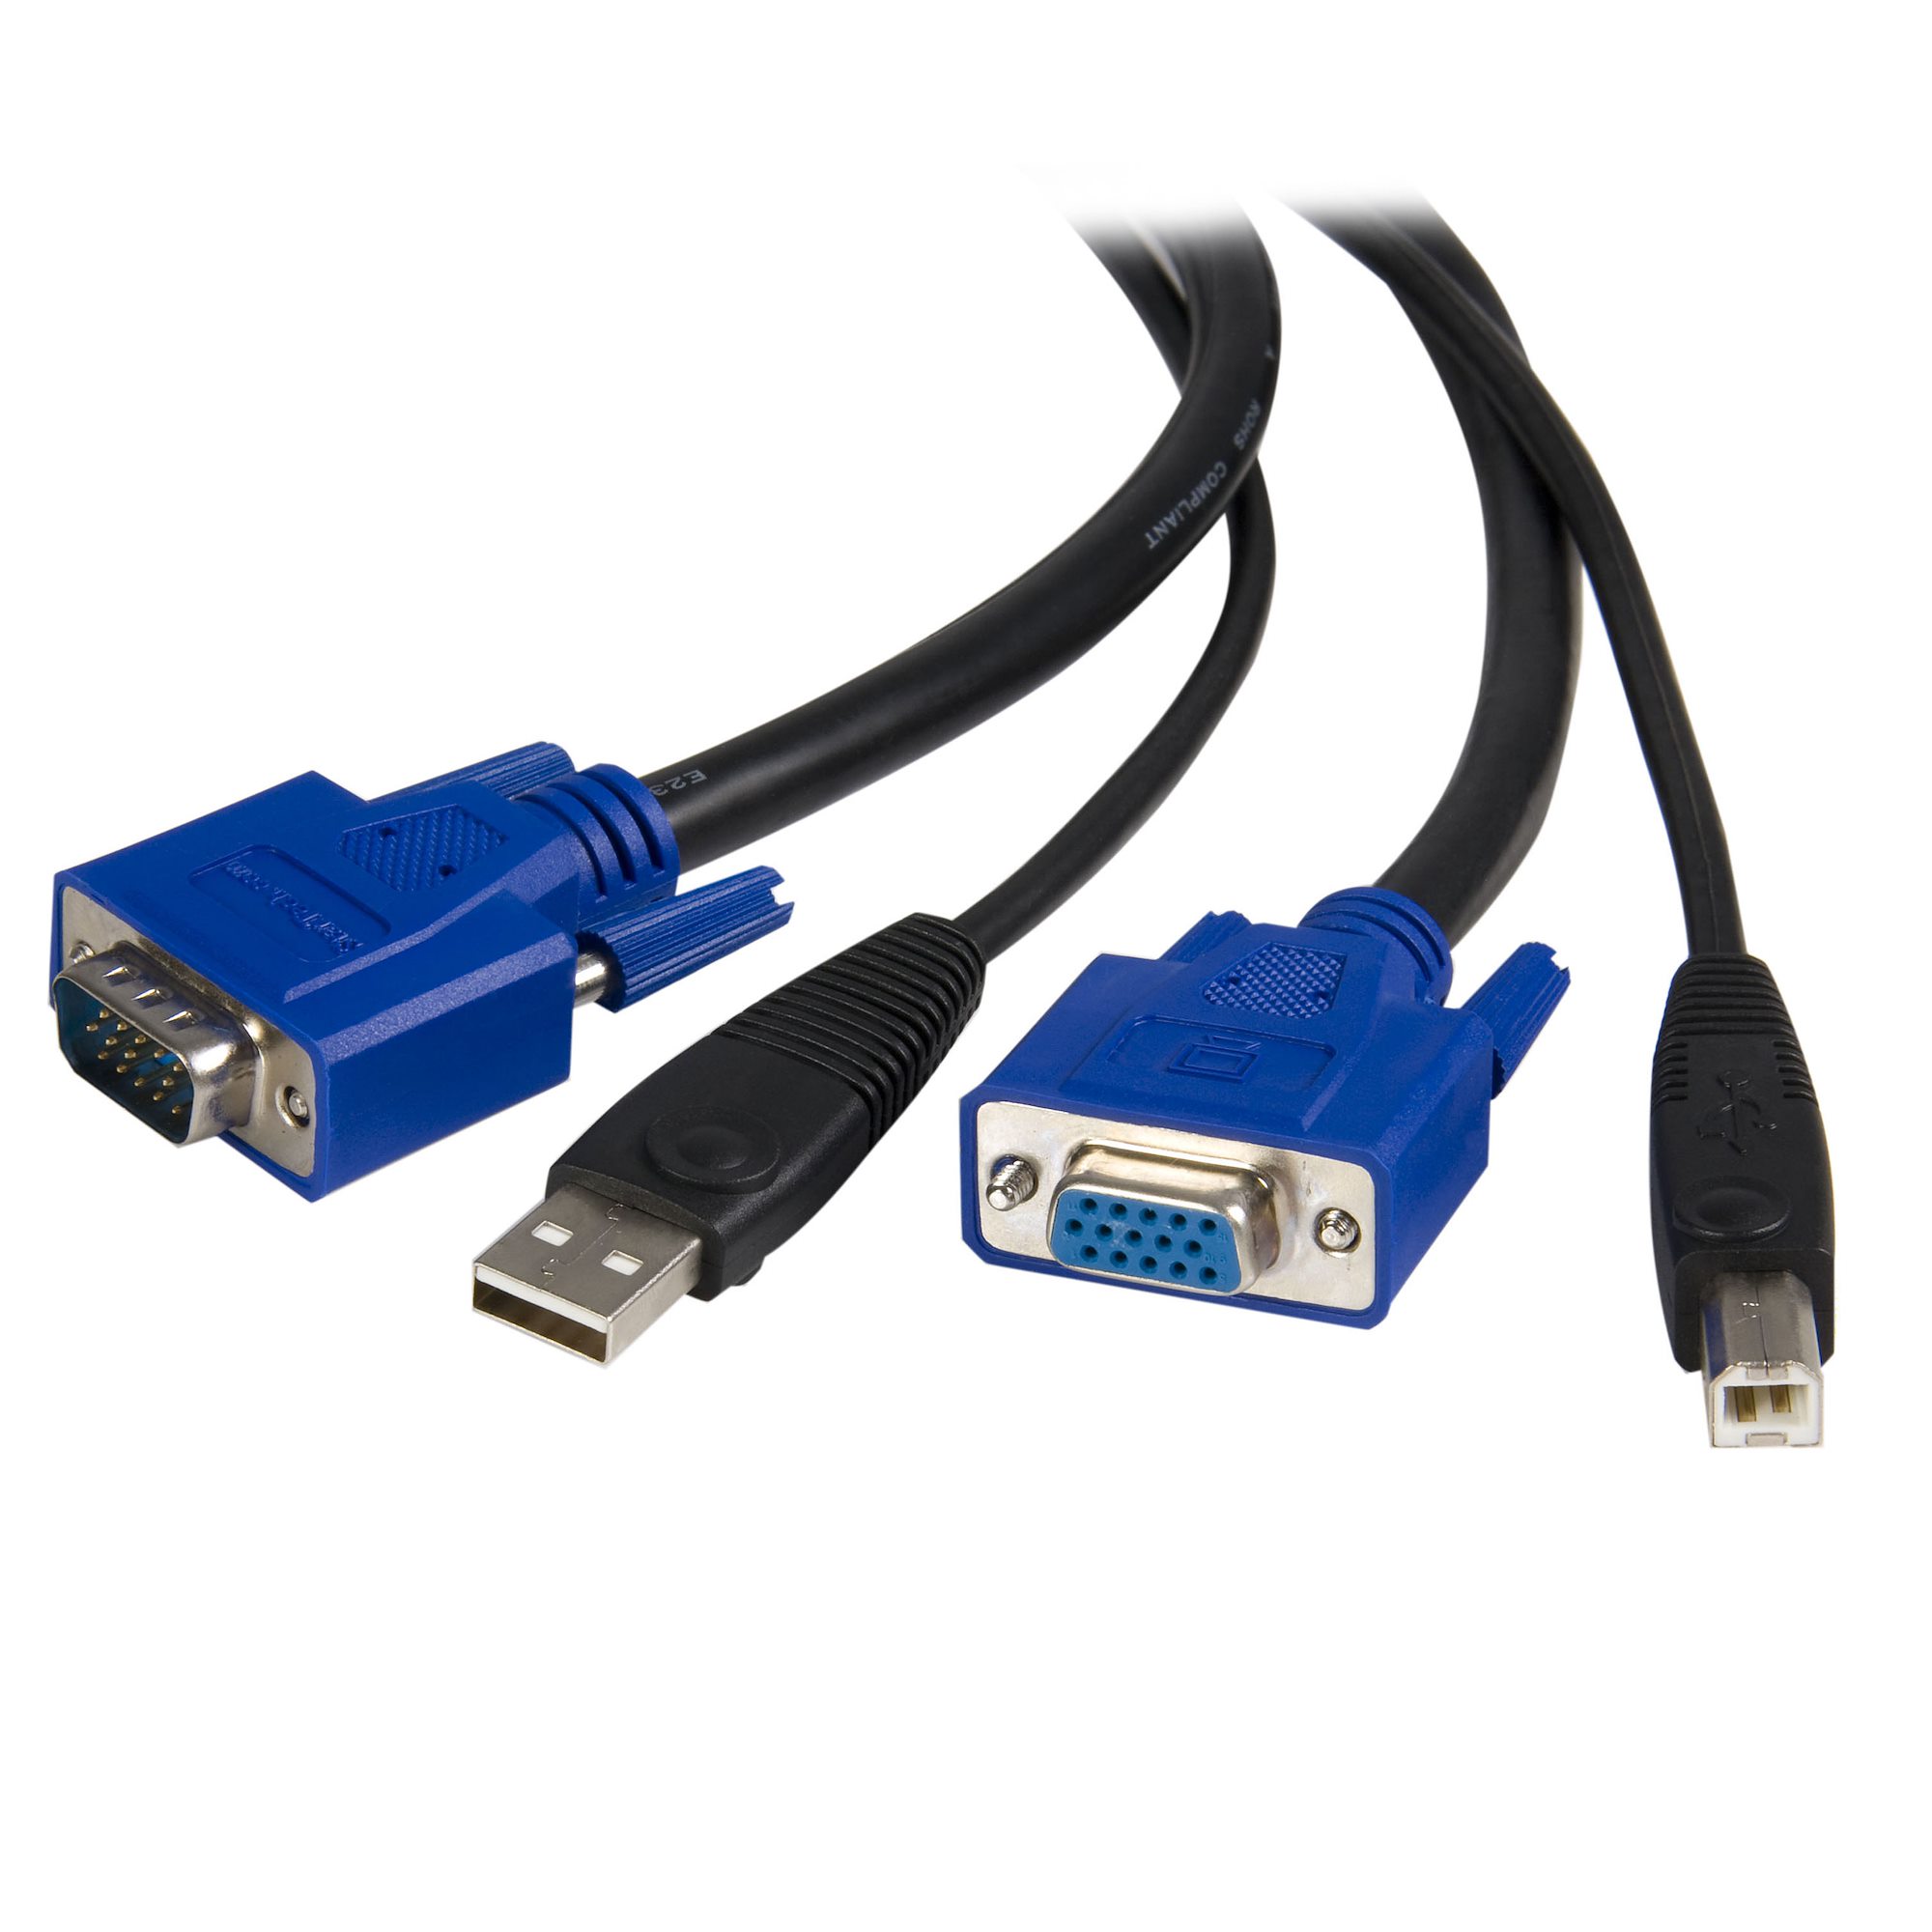 【SVUSB2N1_6】6 FT 2-IN-1 USB KVM CABLE